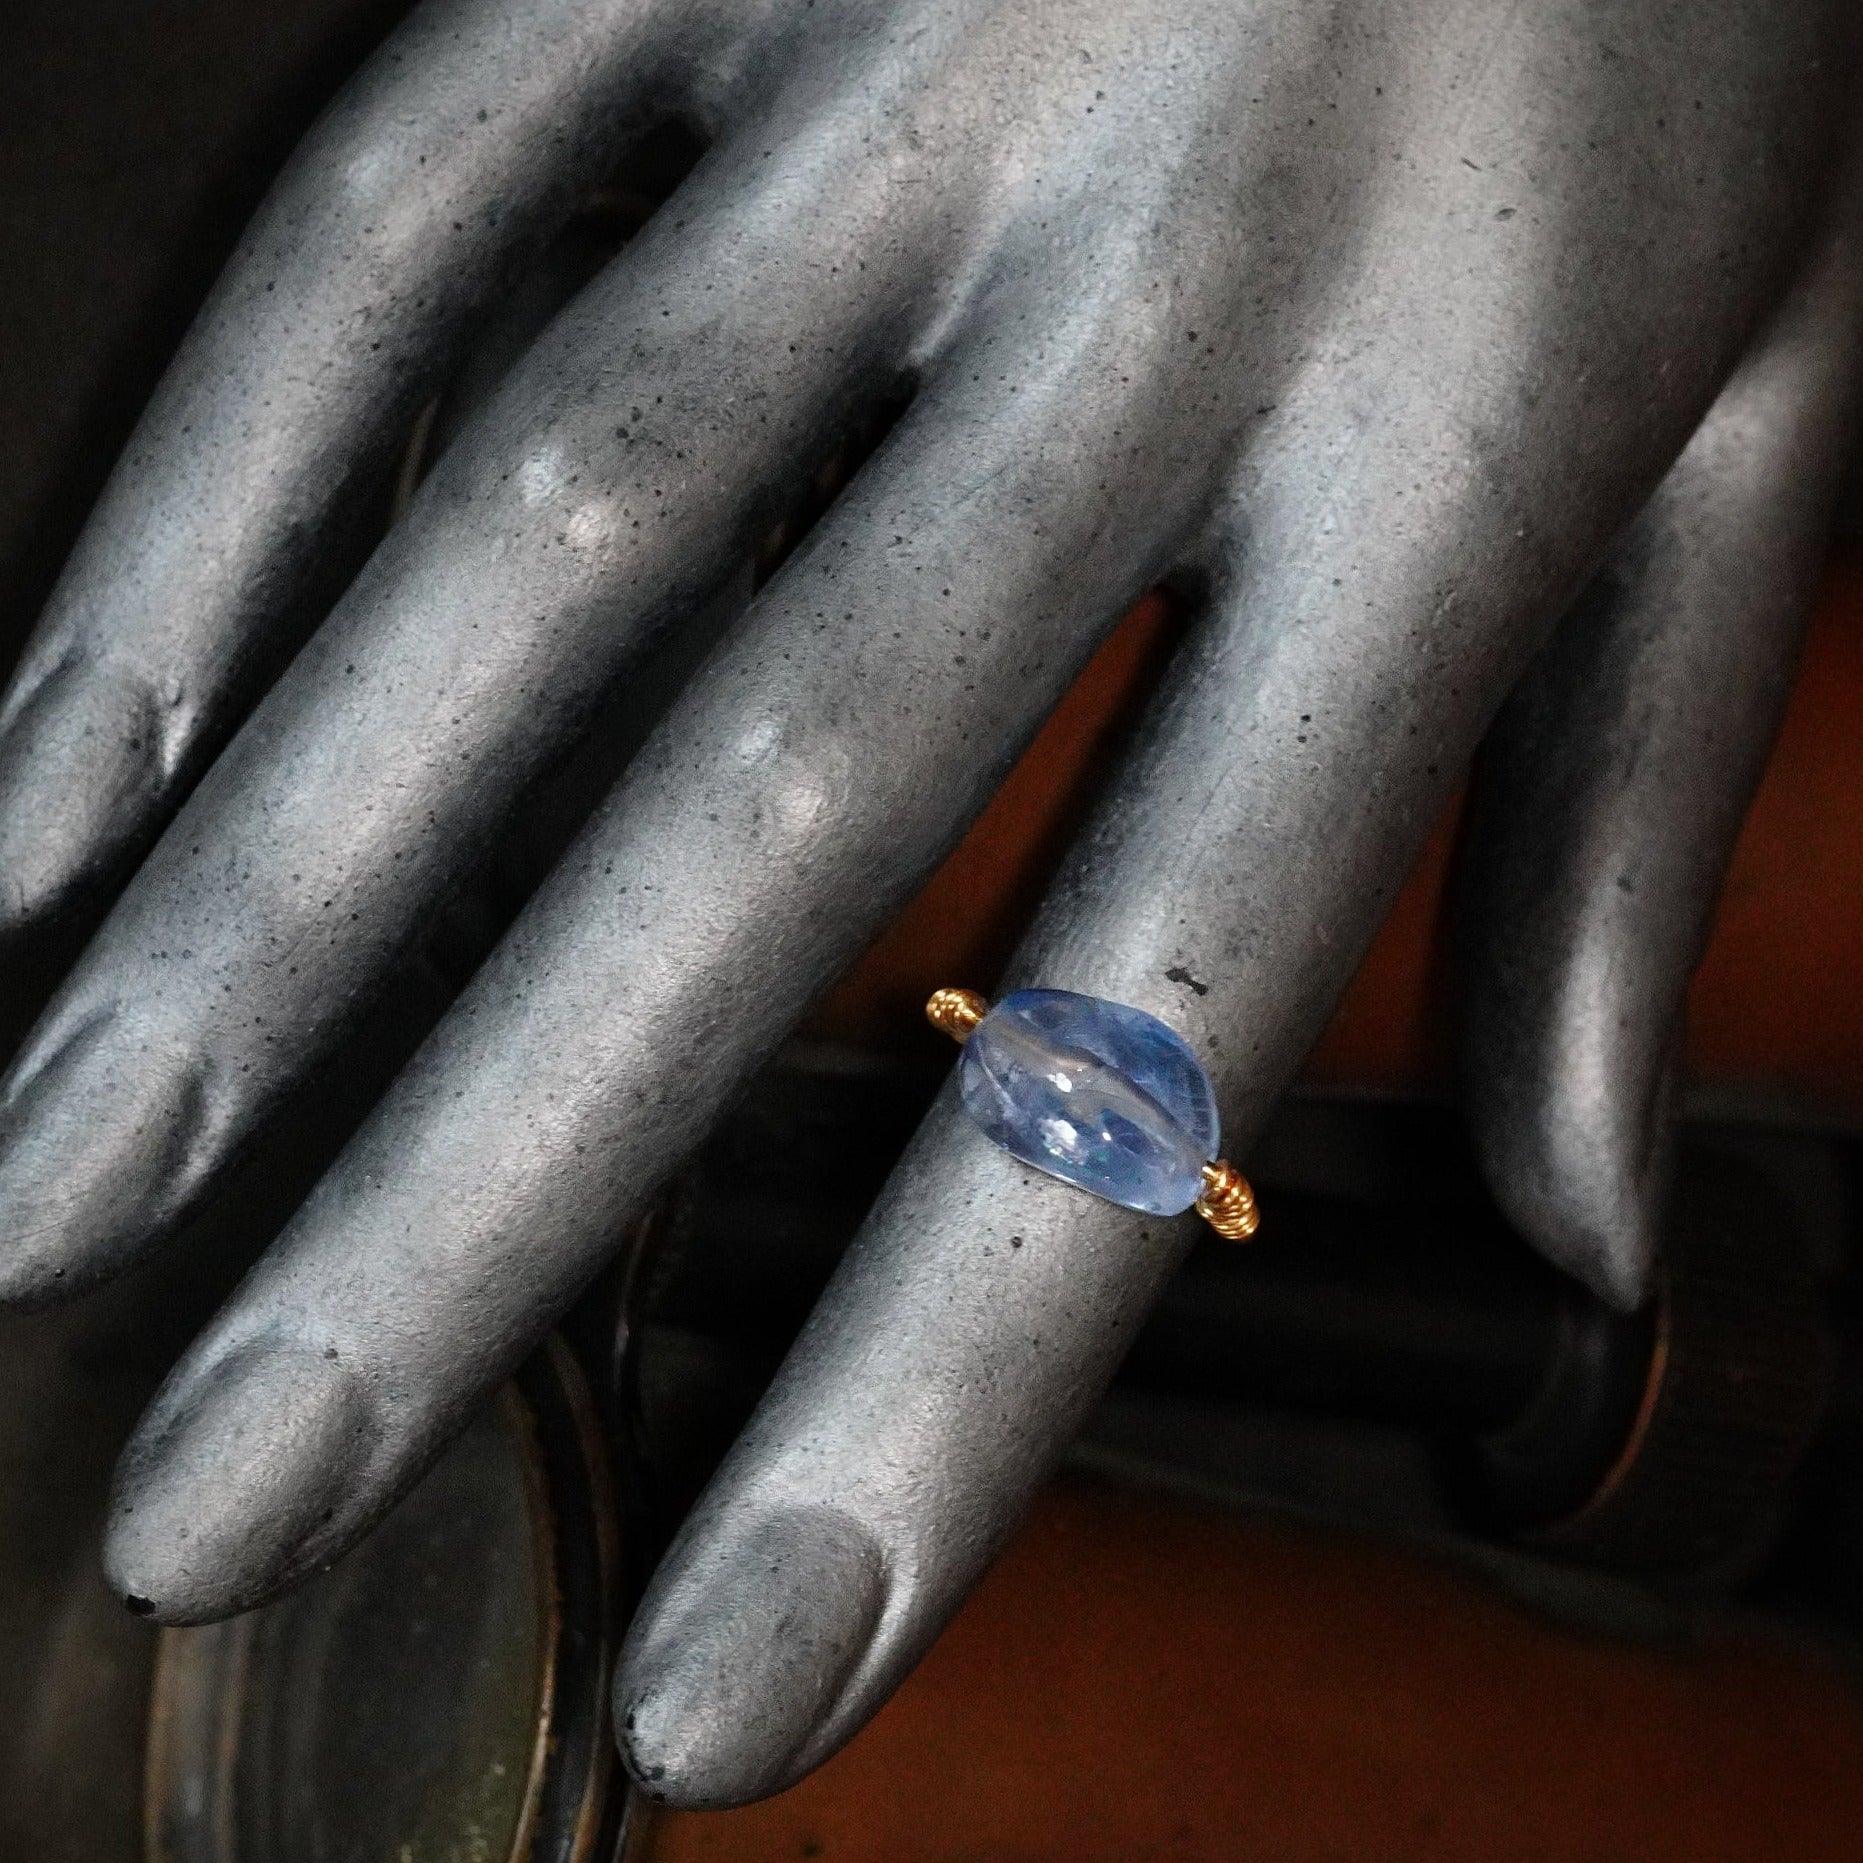 18K Gold Sapphire Ring - Handcrafted Ceylon 9 CT Sapphire Bead Ring by Anup Jogani